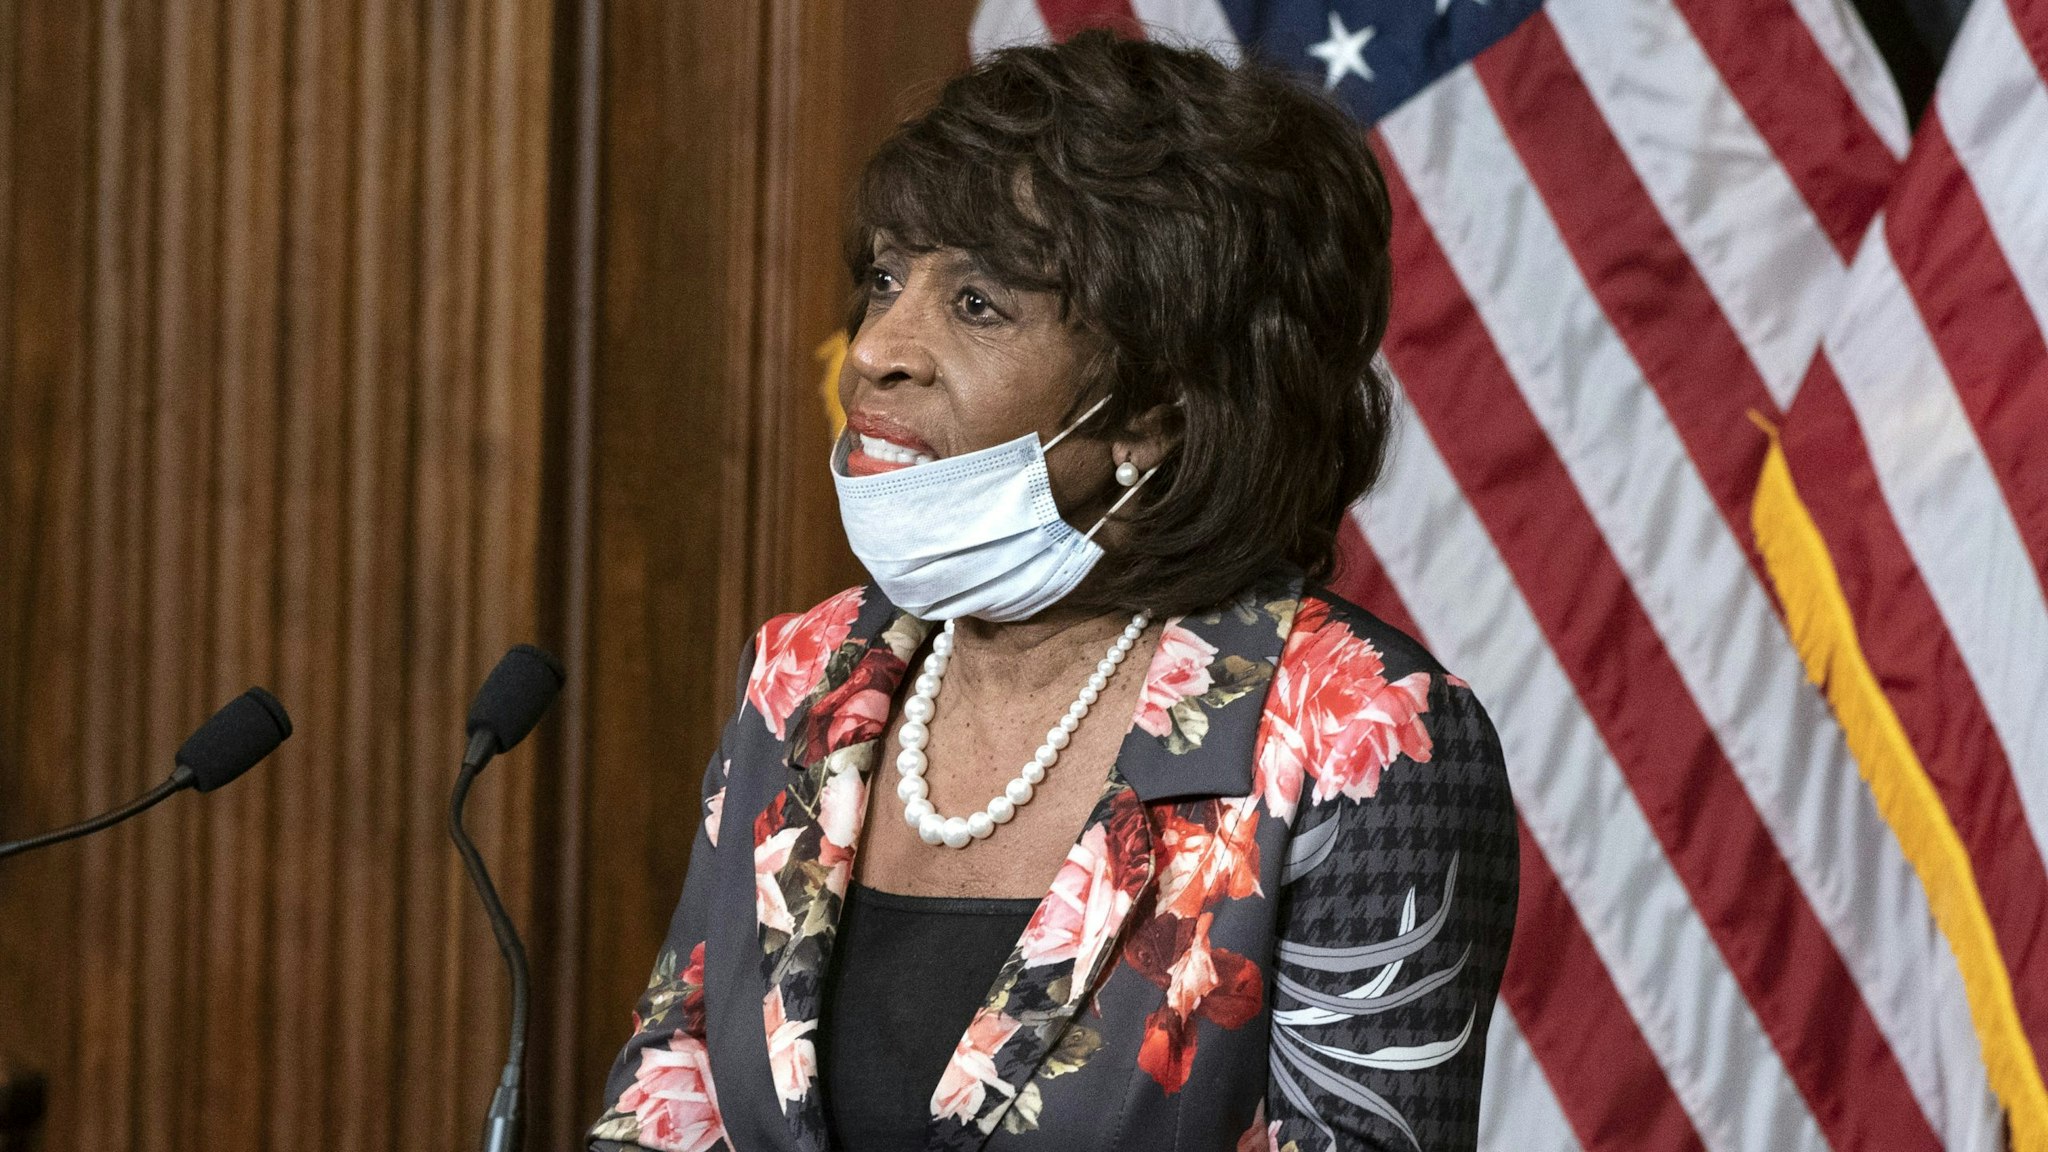 Representative Maxine Waters, a Democrat from California, speaks while participating in a signing ceremony of H.R. 266, The Paycheck Protection Program and Health Care Enhancement Act, in the Rayburn Room of the U.S. Capitol in Washington, D.C., U.S., on Thursday, April 23, 2020. The House overwhelmingly passed and sent to President Donald Trump a $484 billion coronavirus aid package, even as members are already at odds over the next phase of rescue legislation.